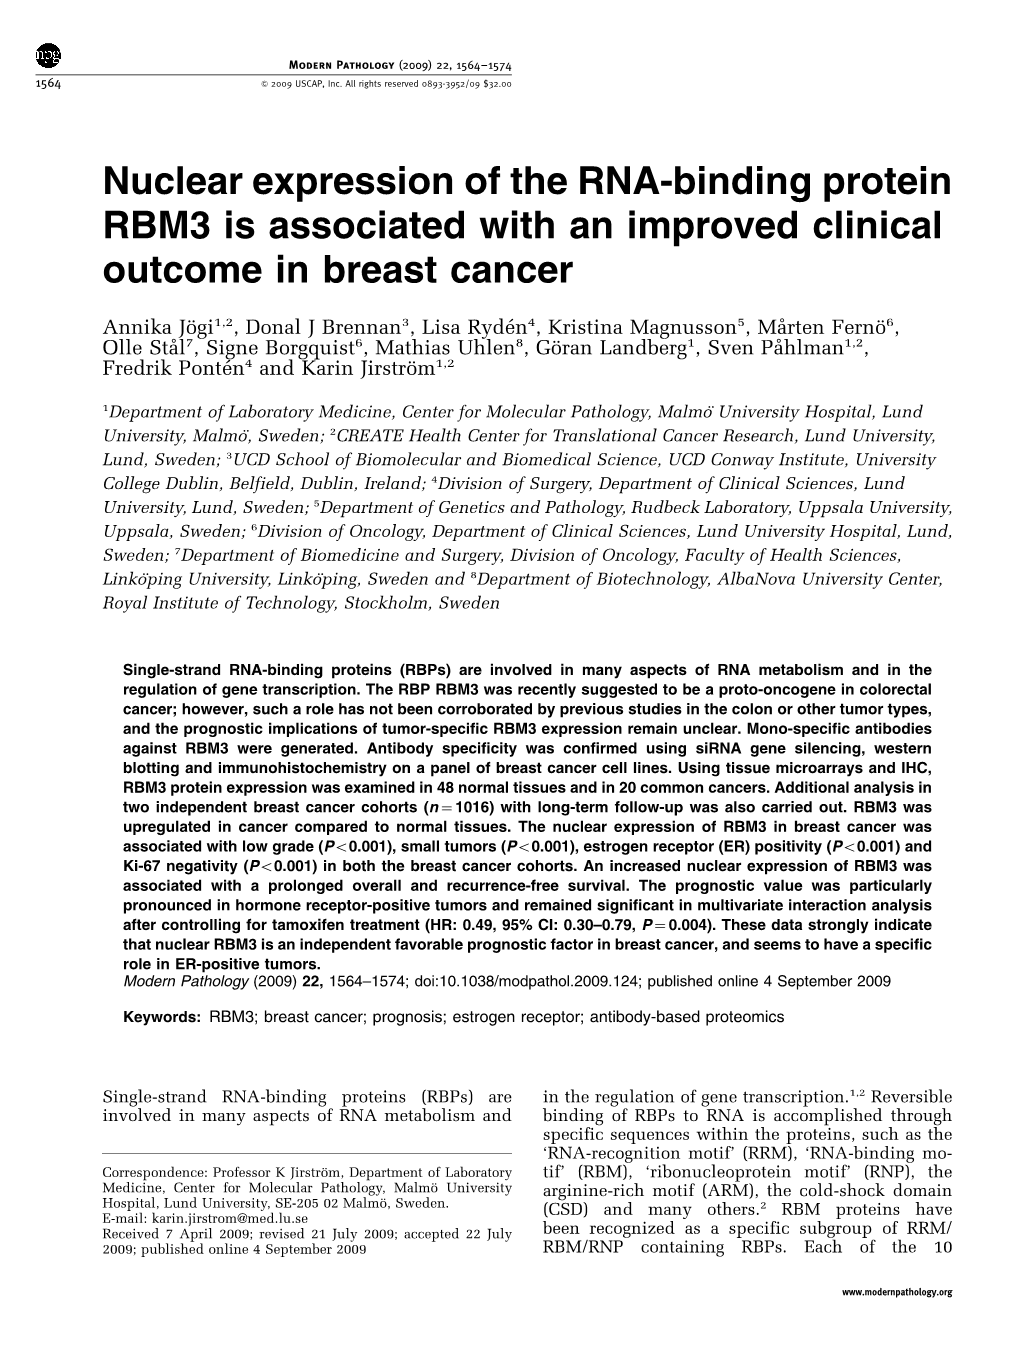 Nuclear Expression of the RNA-Binding Protein RBM3 Is Associated with an Improved Clinical Outcome in Breast Cancer